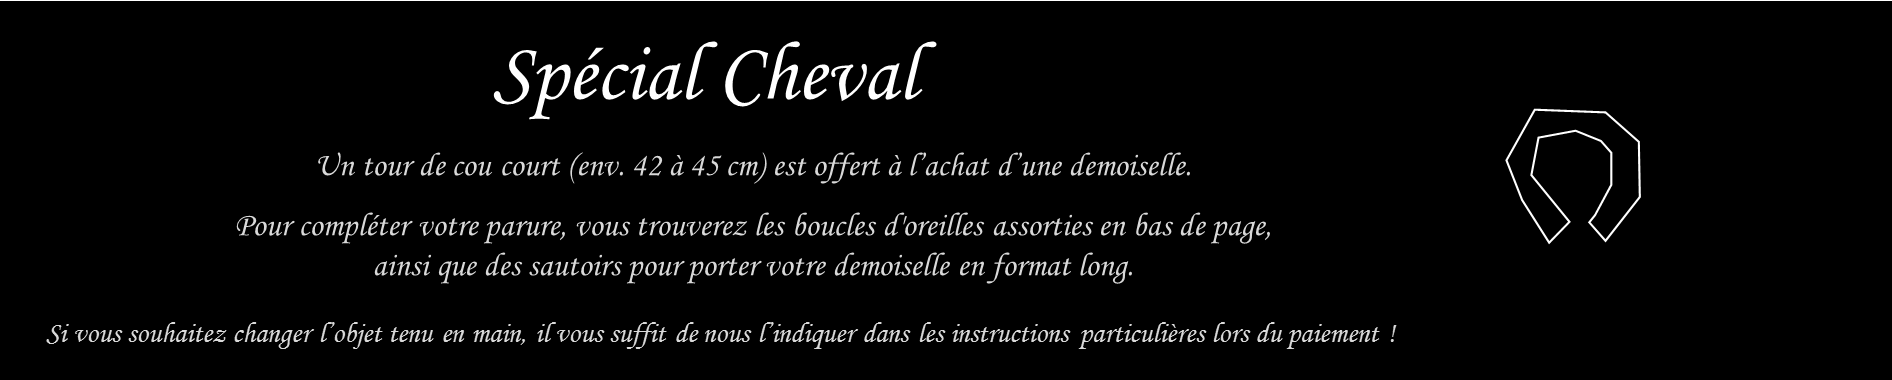 Cheval 2